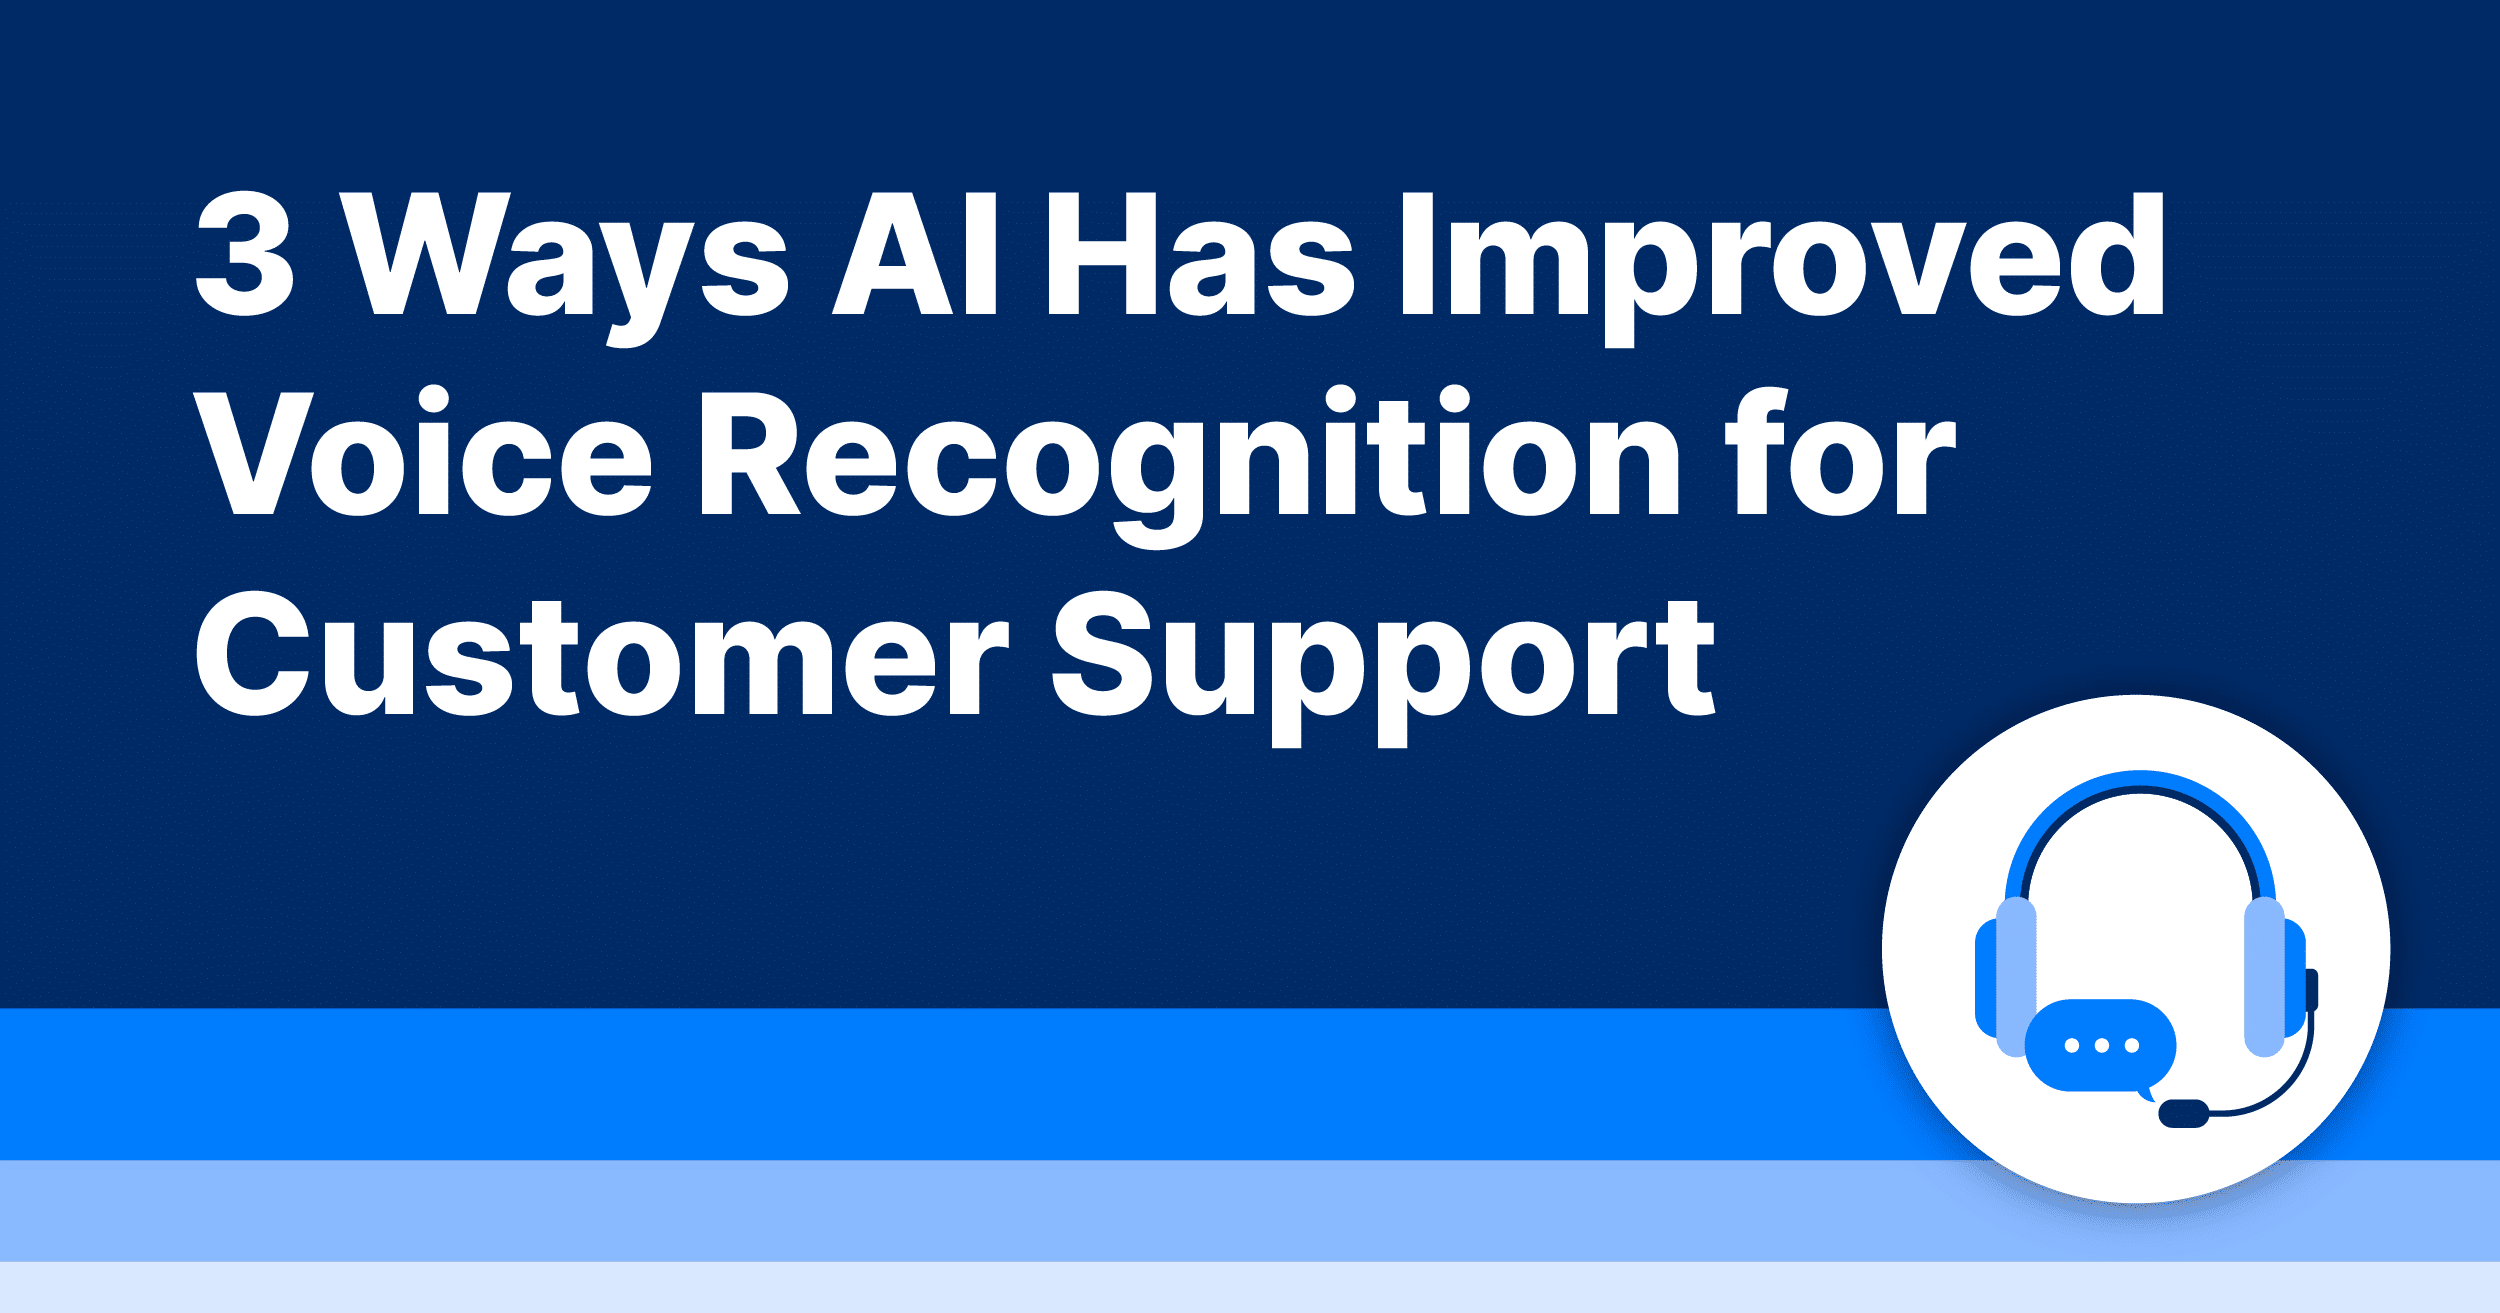 3 Ways AI Has Improved Voice Recognition for Customer Support